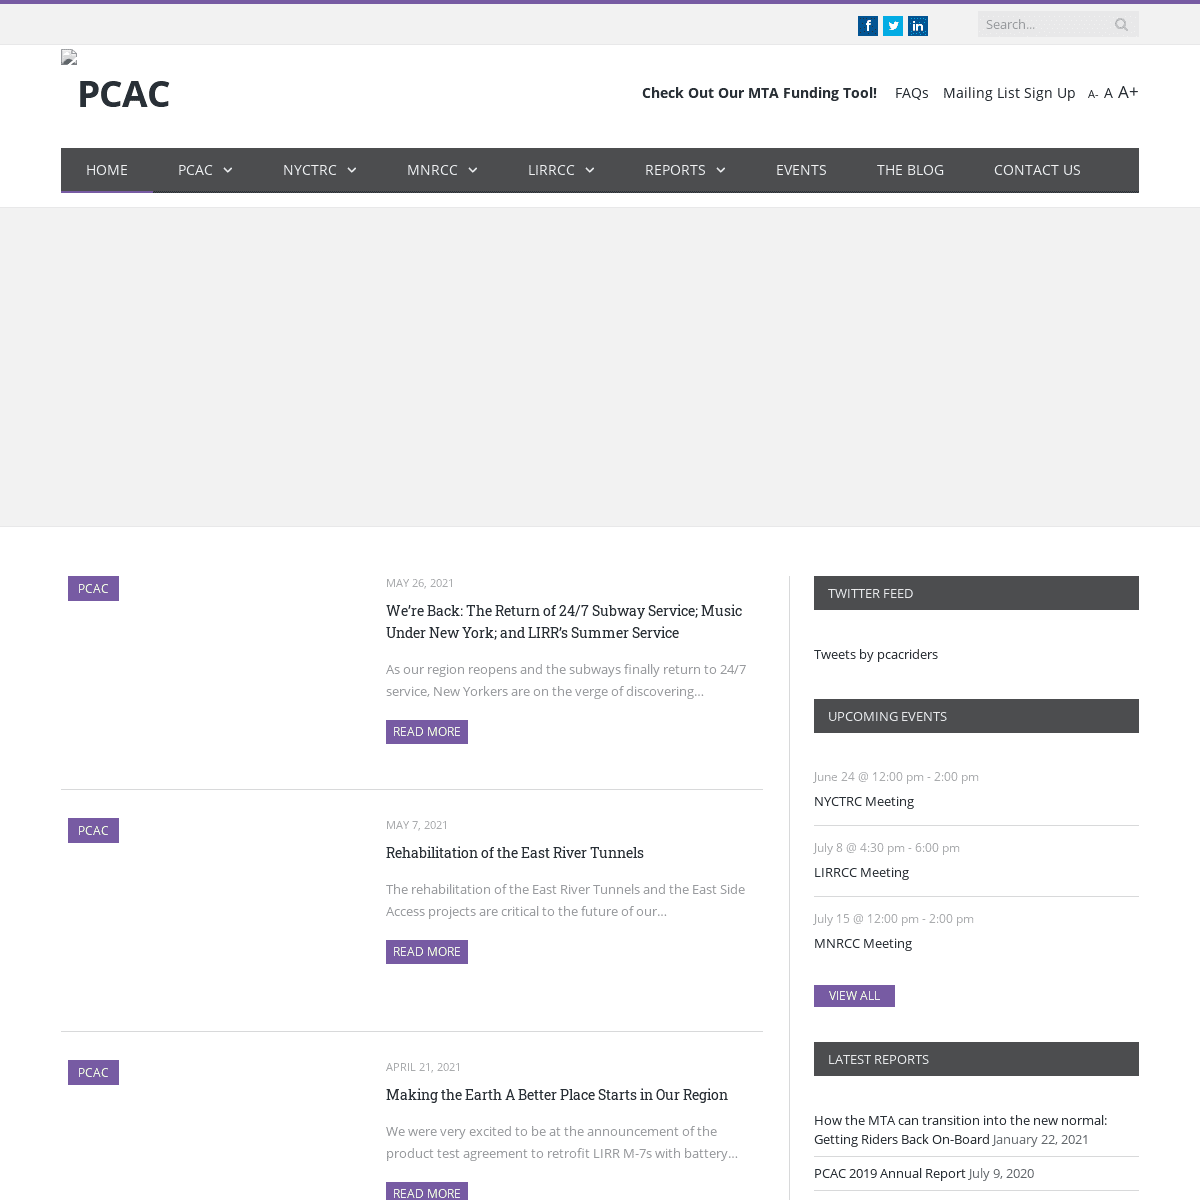 A complete backup of https://pcac.org